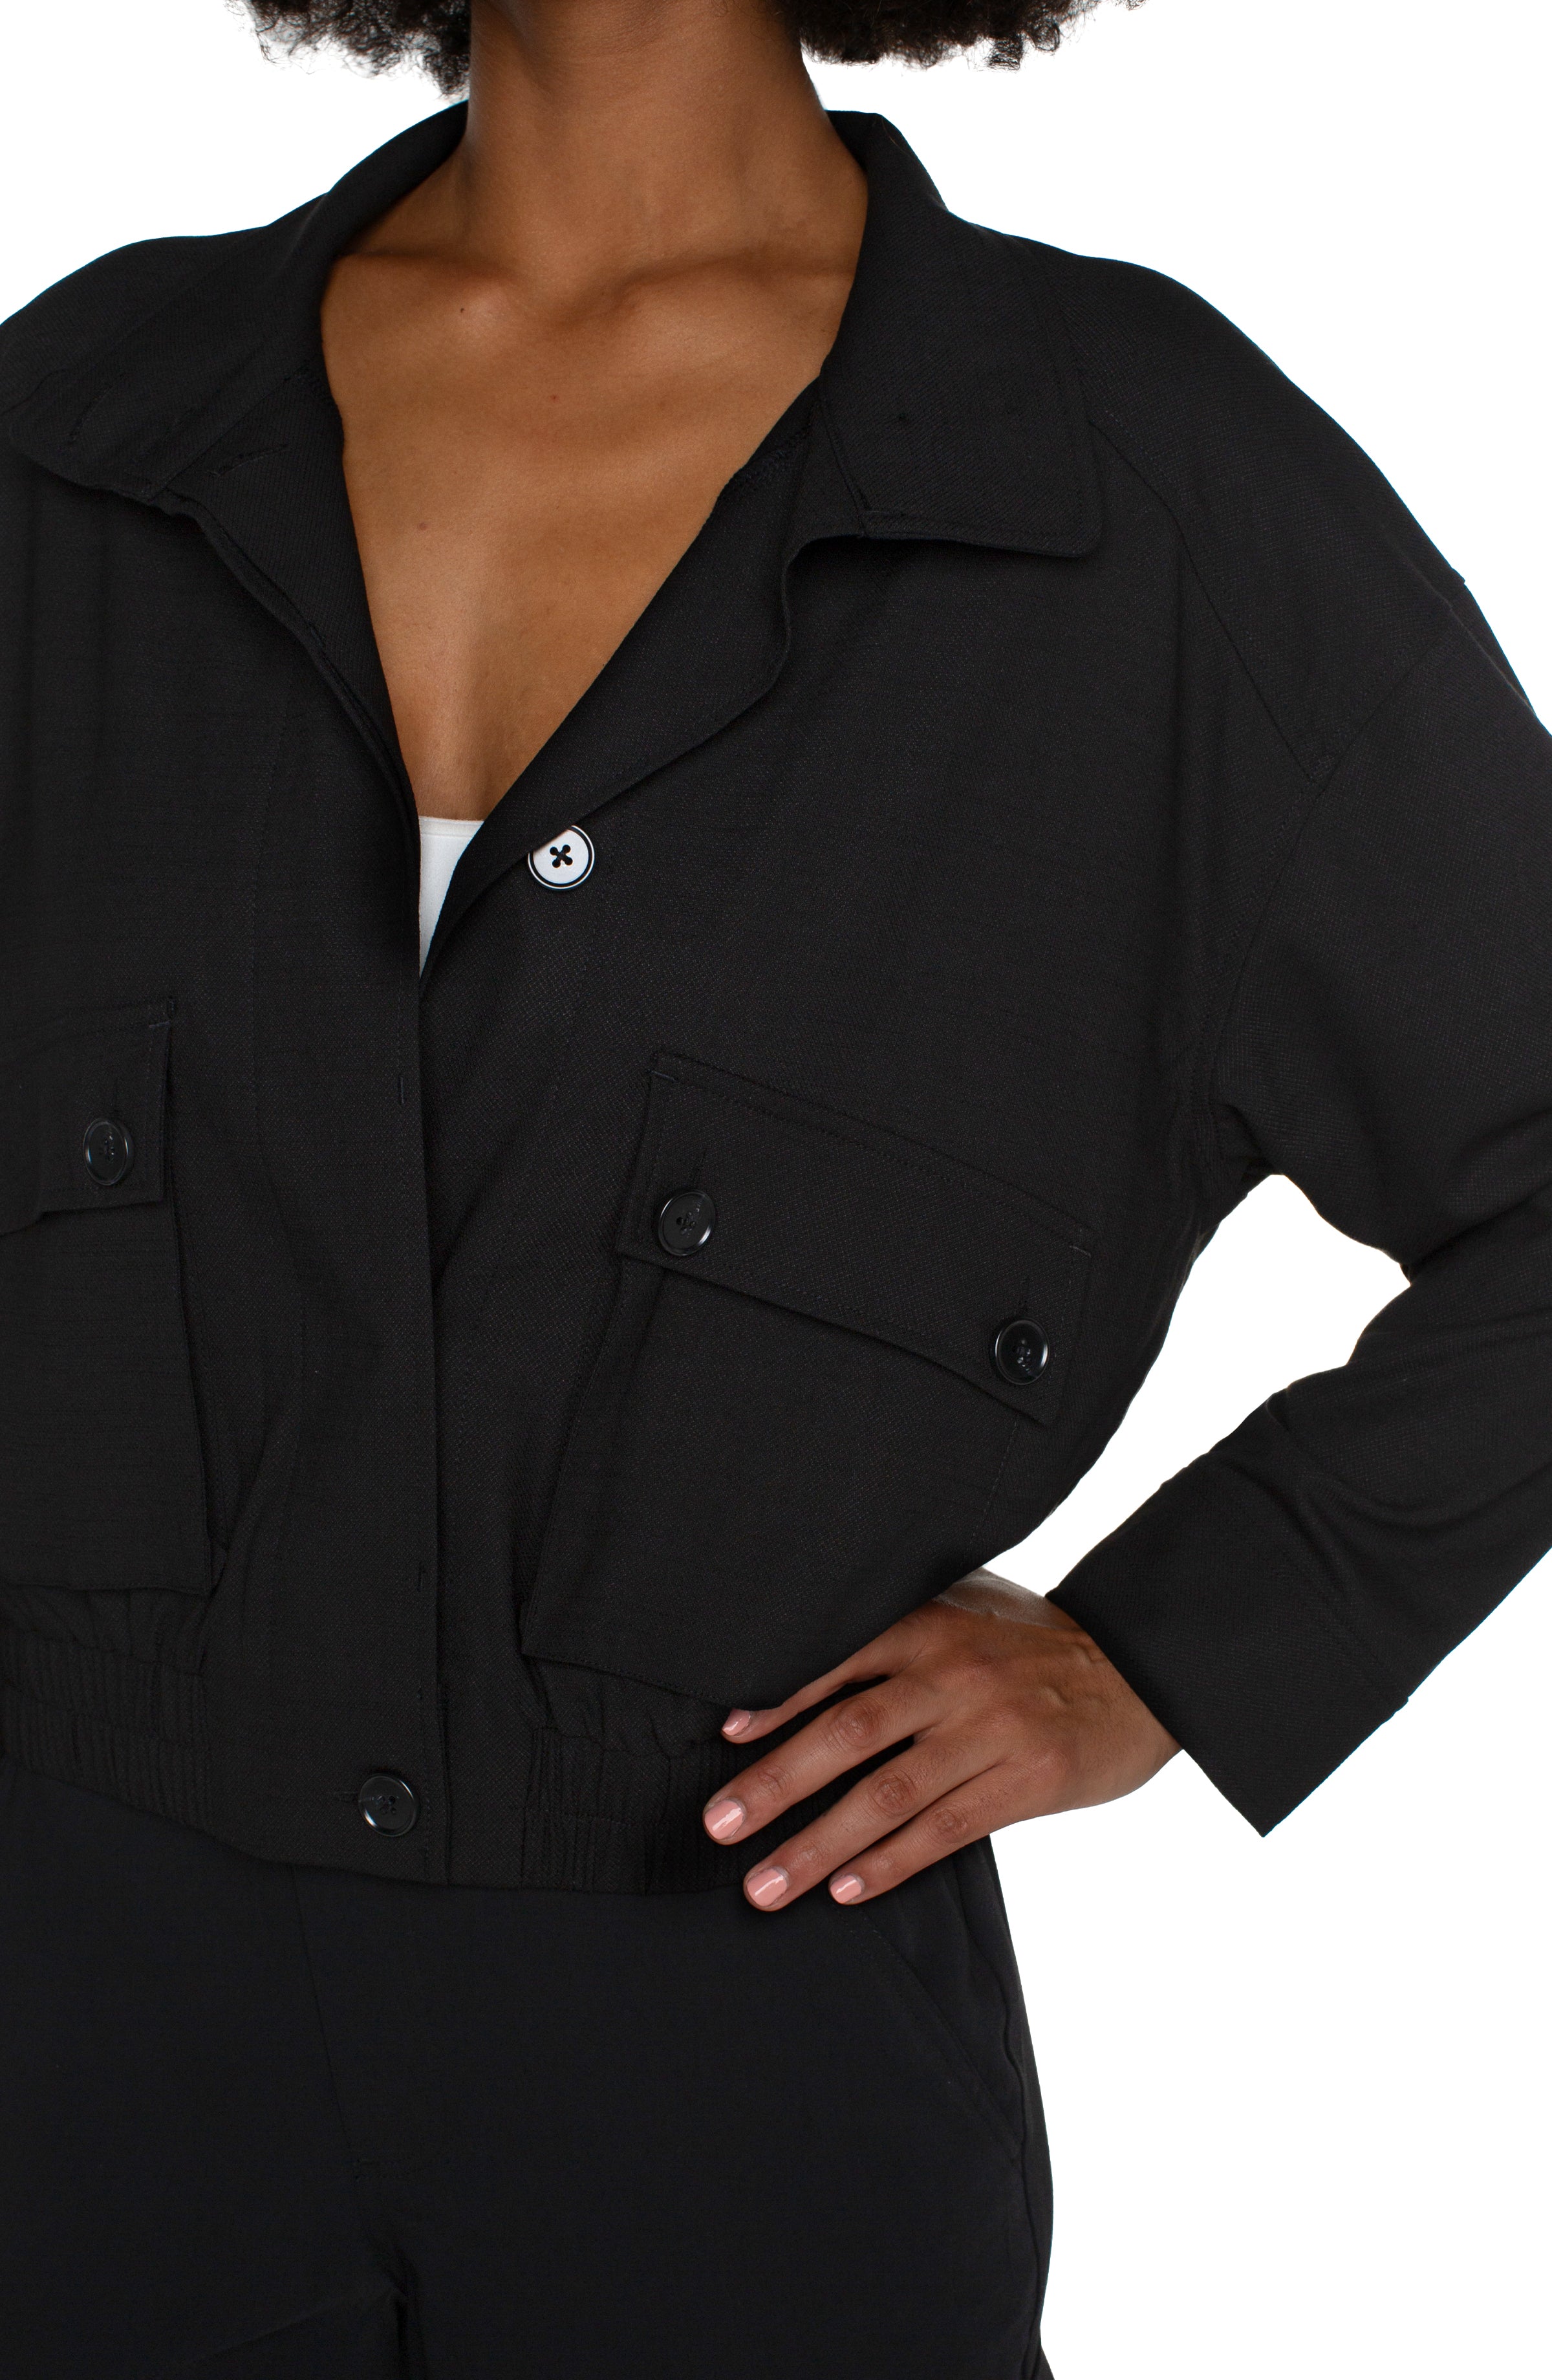 Liverpool Utility Jacket with Cinch Hem - Black Close Up View